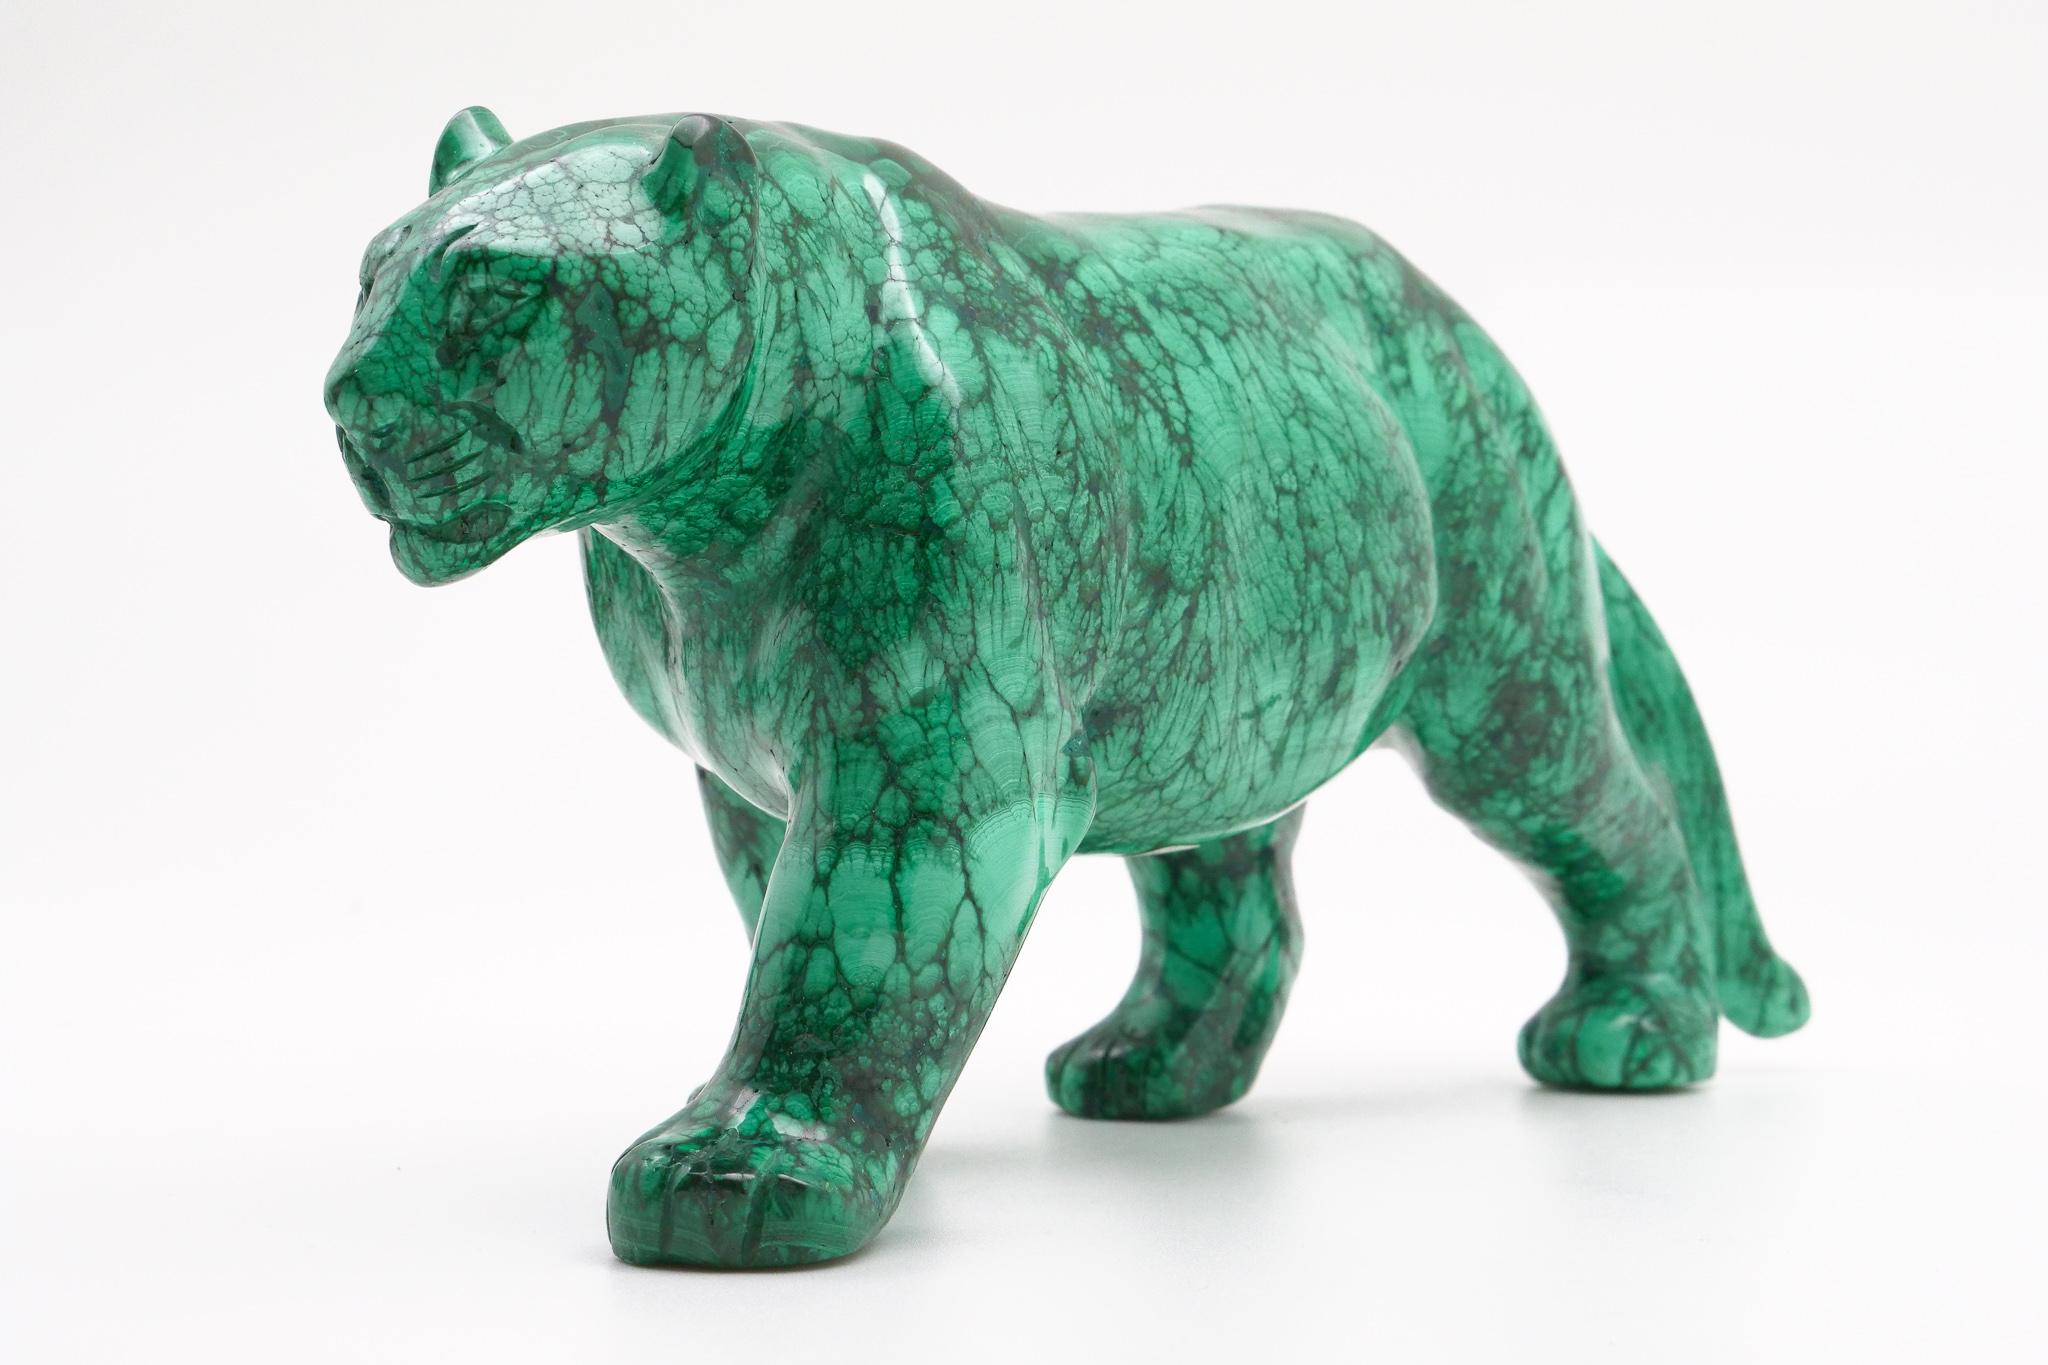 The malachite for this carving was sourced from the Congo where the finest quality of this mineral is currently found. Malachite from the 18th and 19th century was also sourced from Russia. Carvings, such as this, were typically brought back from